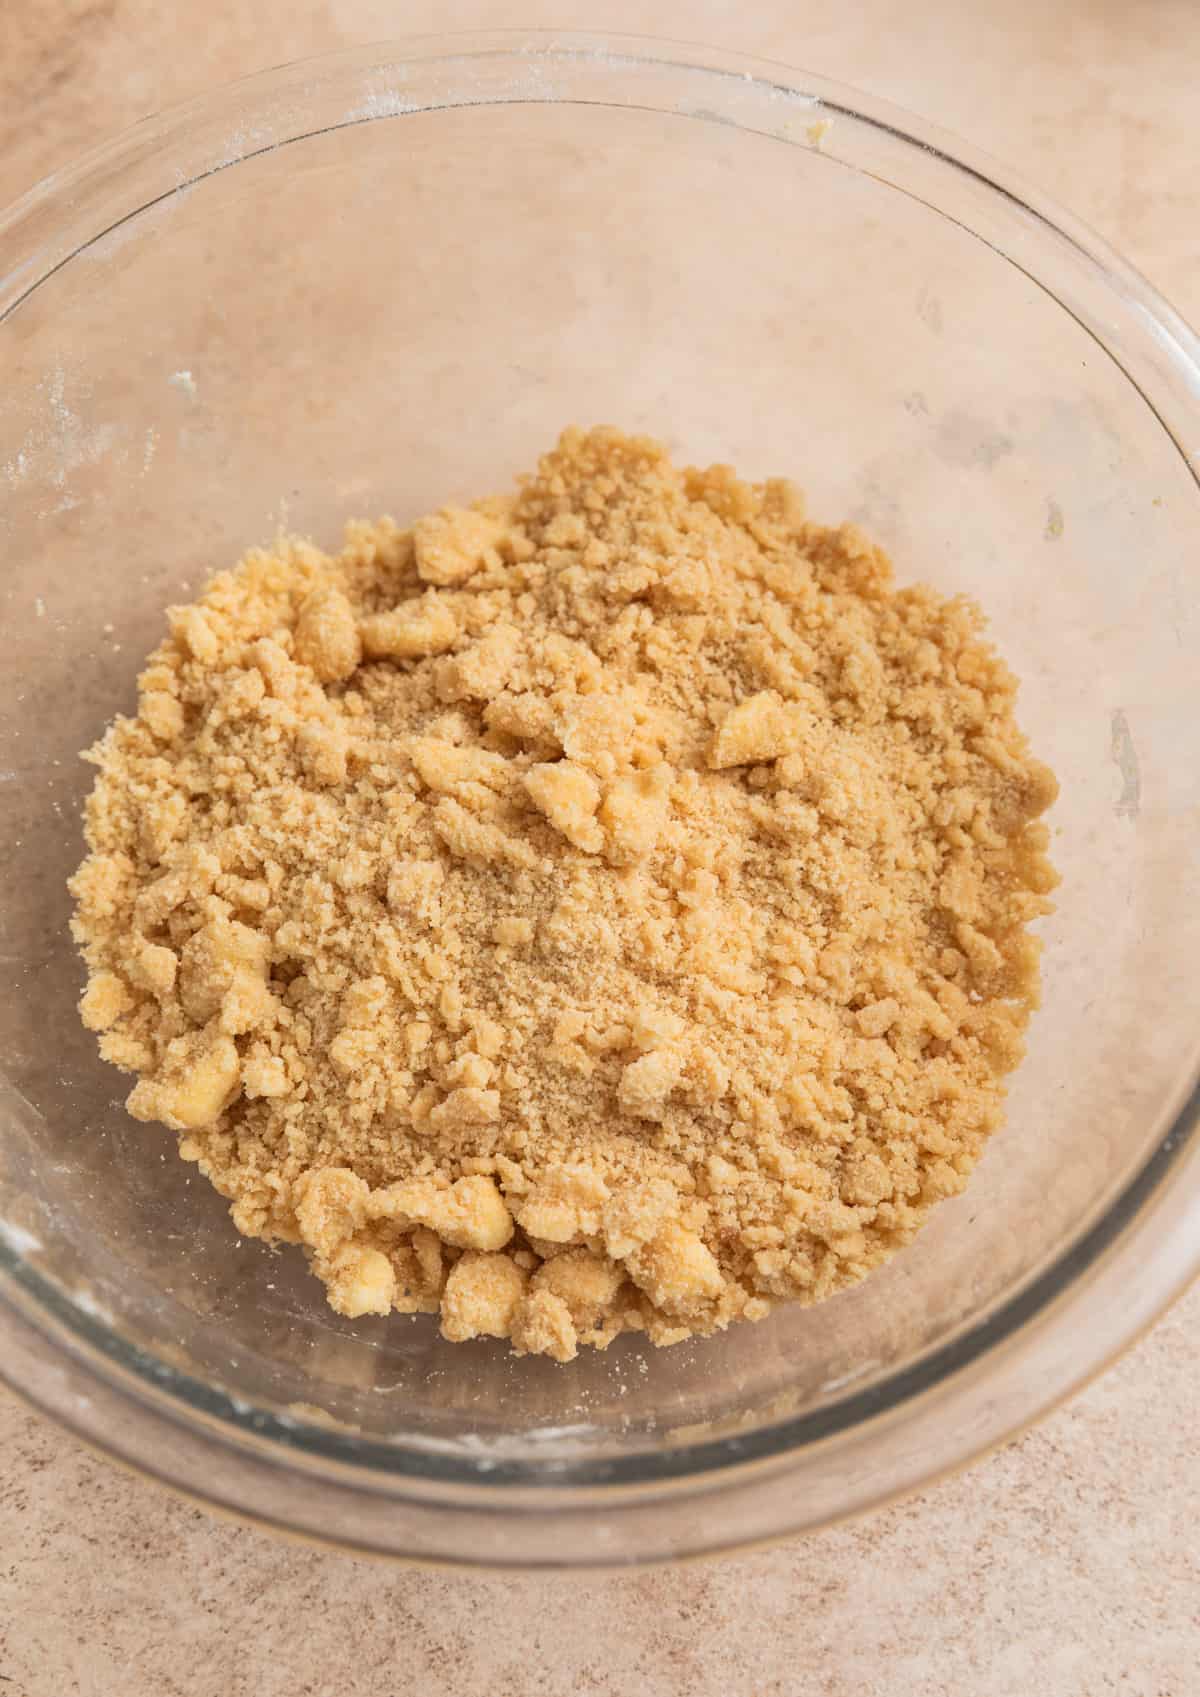 Crumbed streusel mixture in glass bowl.